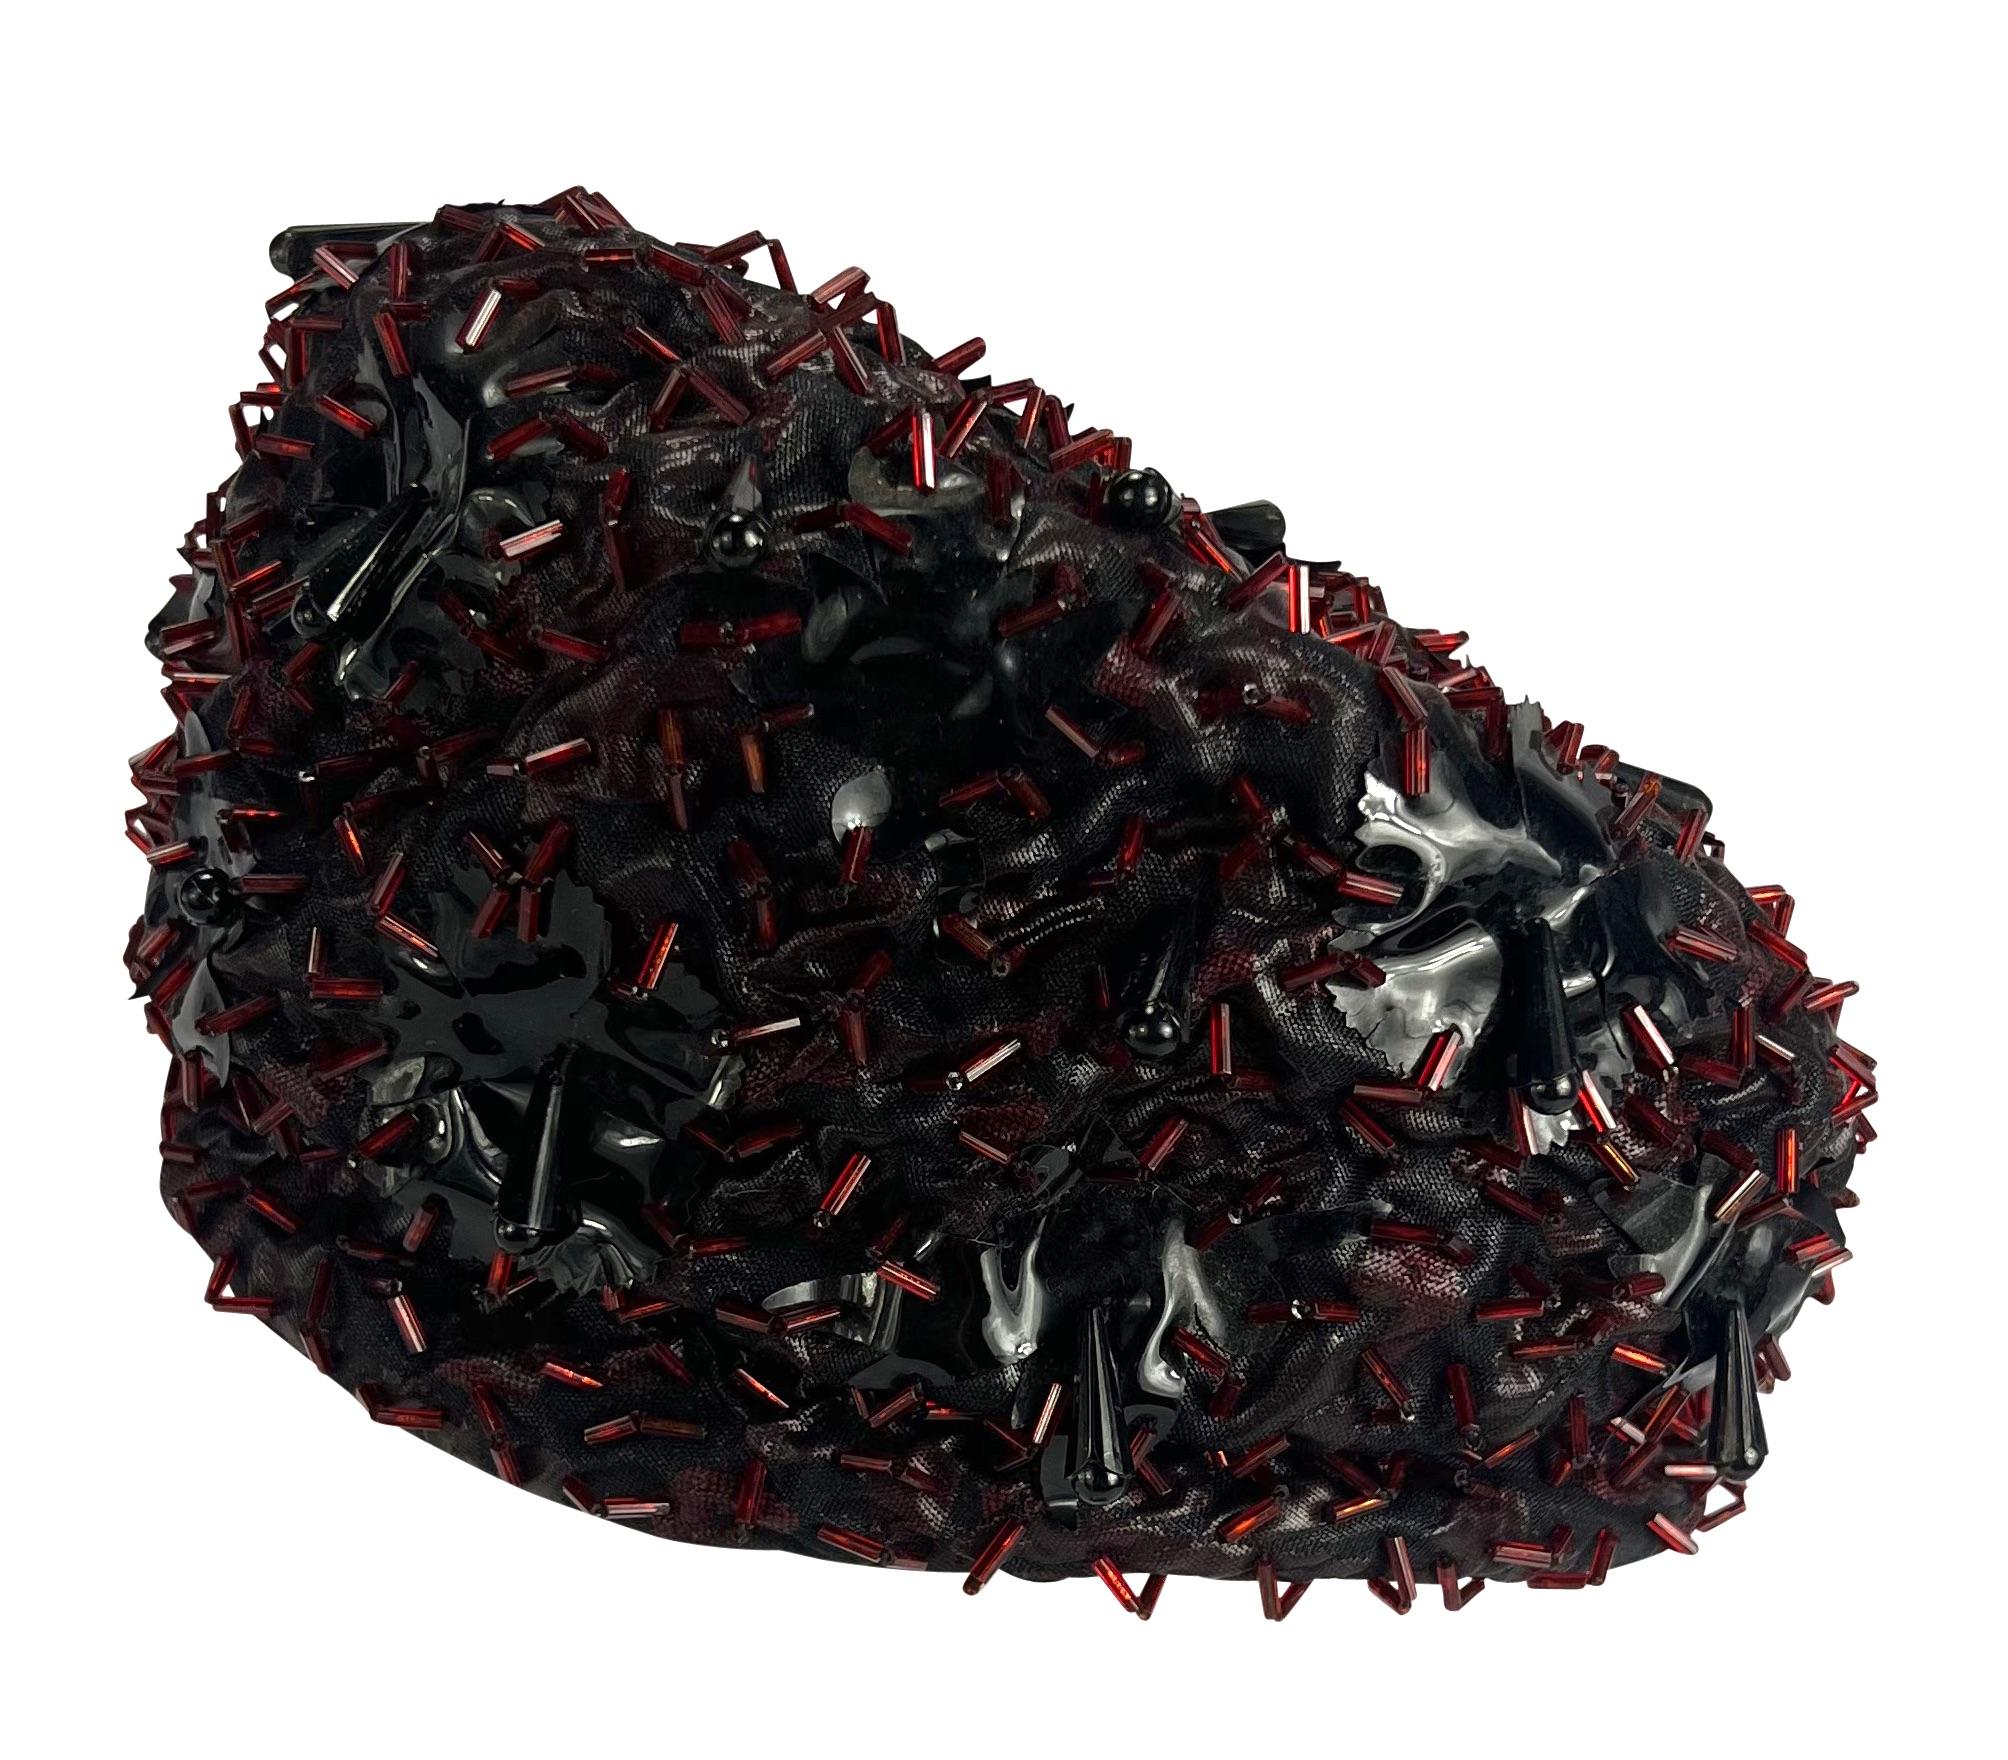 Presenting a fabulous black vintage Christian Dior beaded turban-style hat. From the 1960s, this hat is covered in red and black beads and is the perfect chic addition to any wardrobe! 

Approximate Measurements: 
Height: 5.5